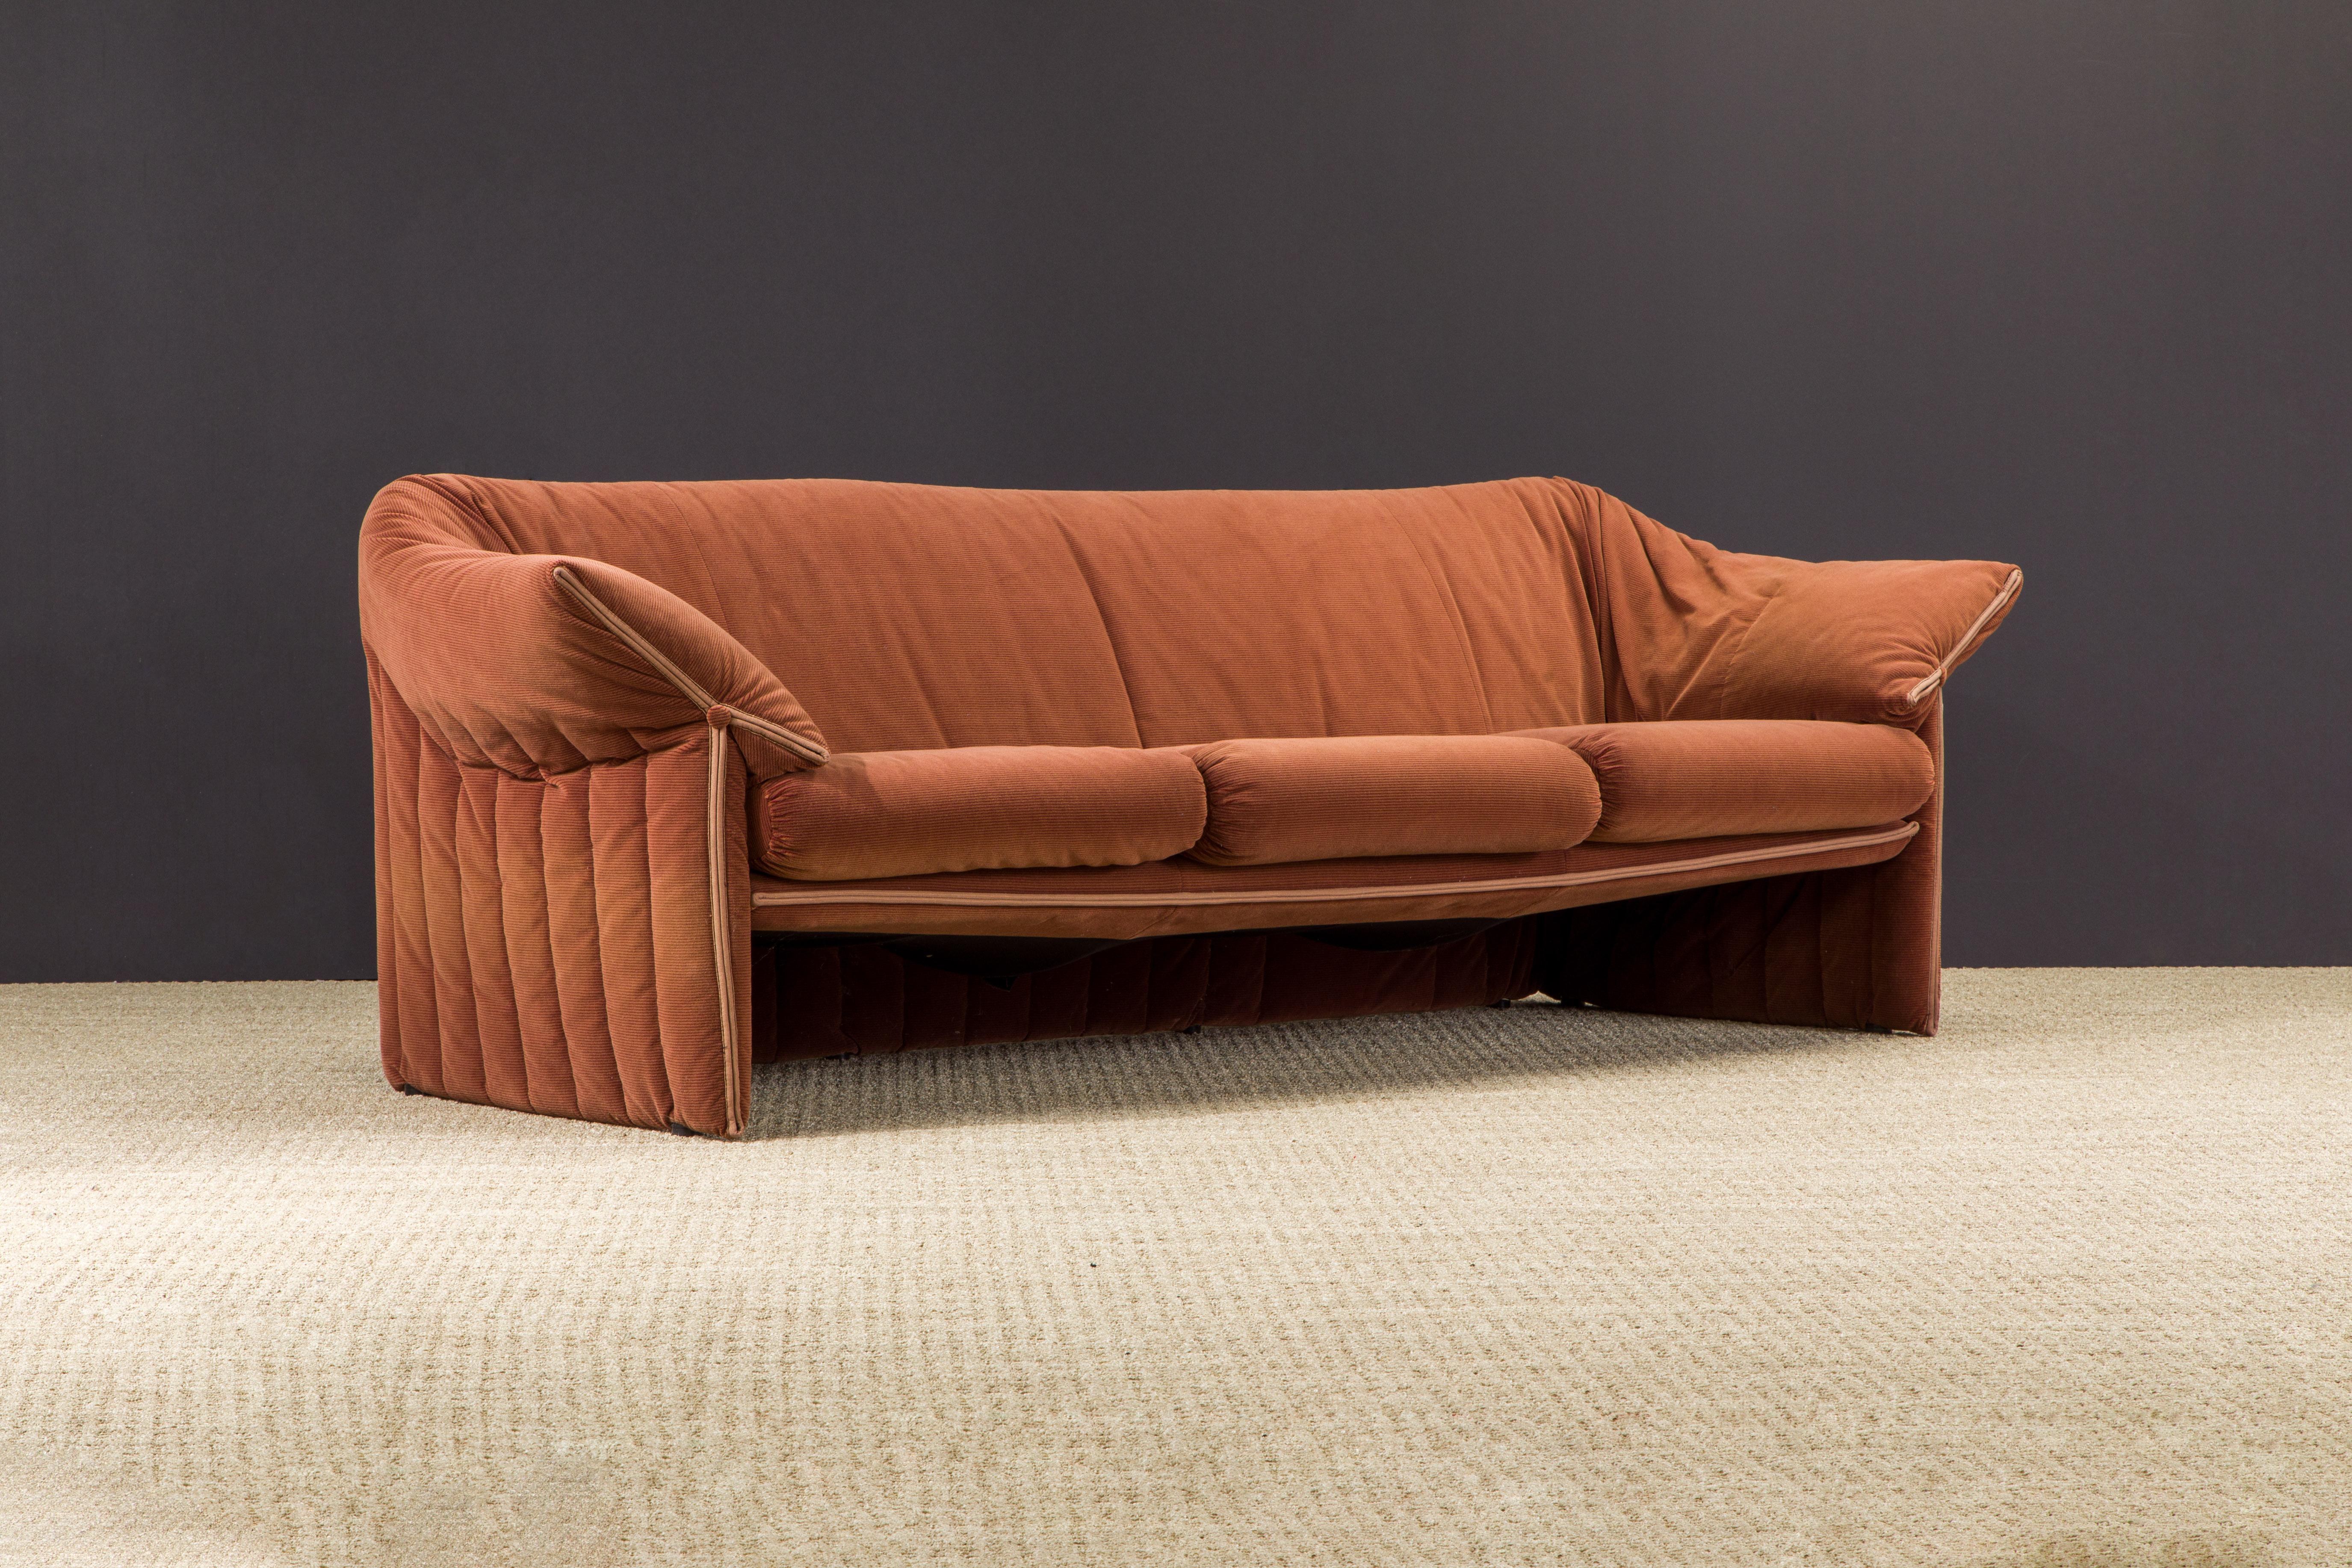 This fantastic three seat 'Le Stelle' sofa by Mario Bellini for B&B Italia was designed in 1974, this early production (original) example is from mid to late 1970s, with soft, cozy and comfortable brown fabric with contrasting piping. Excellent